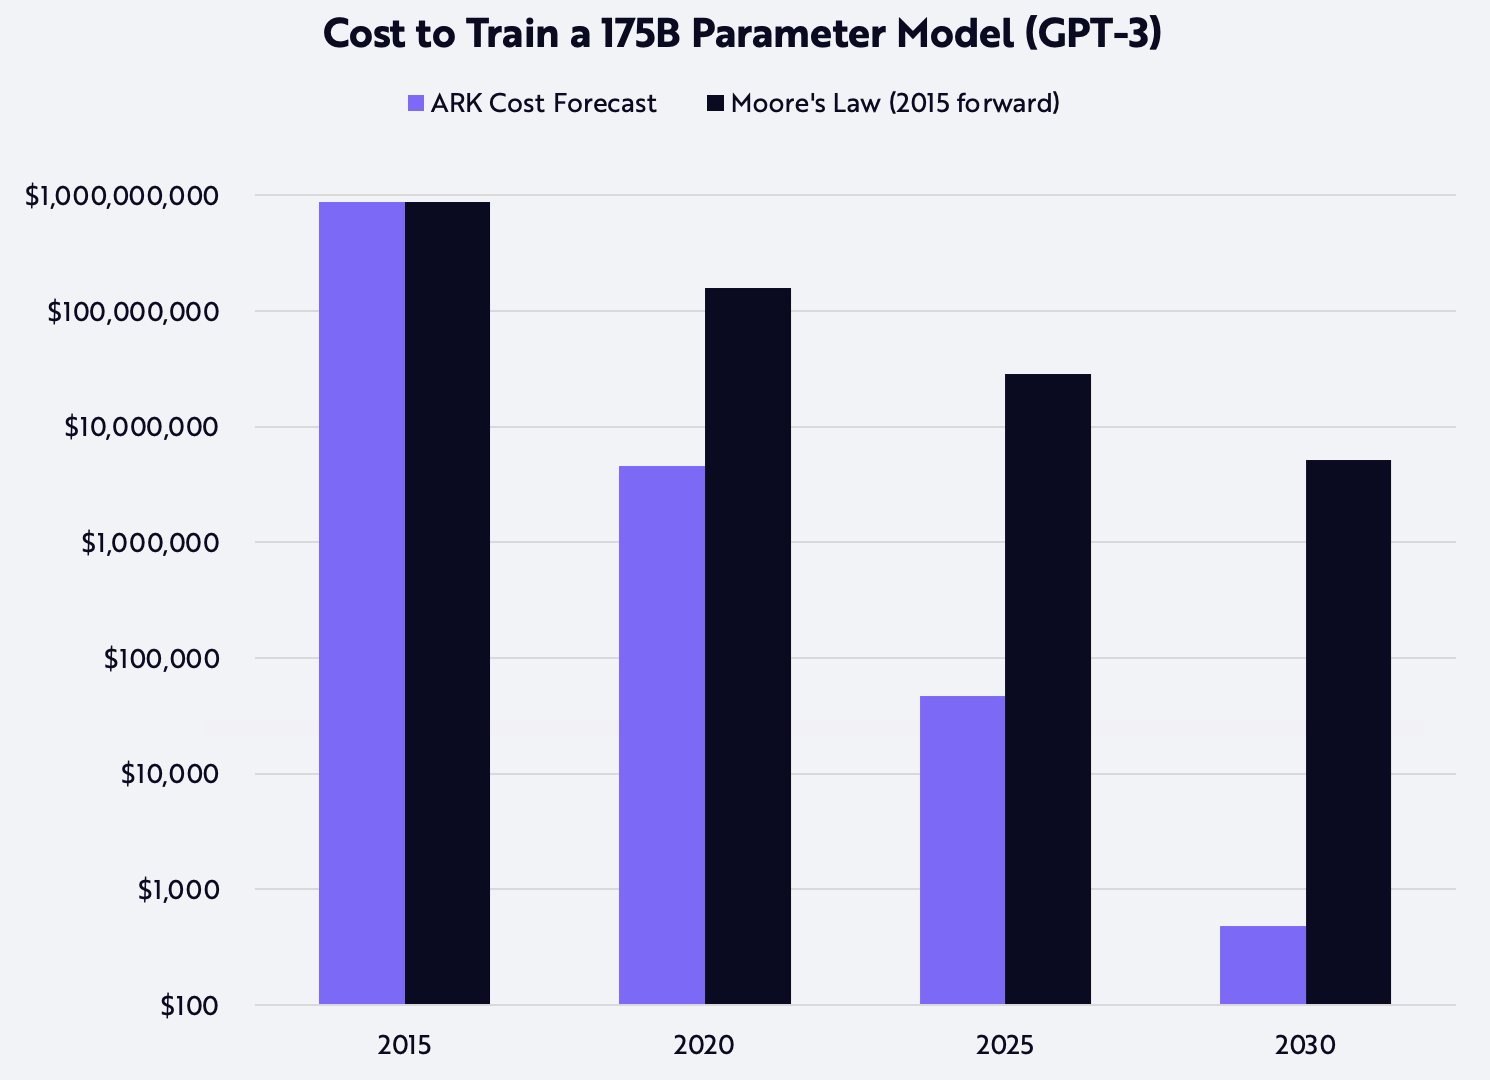 AI, artificial intelligence, productivity gains, Cost to Train 175B Parameter Model